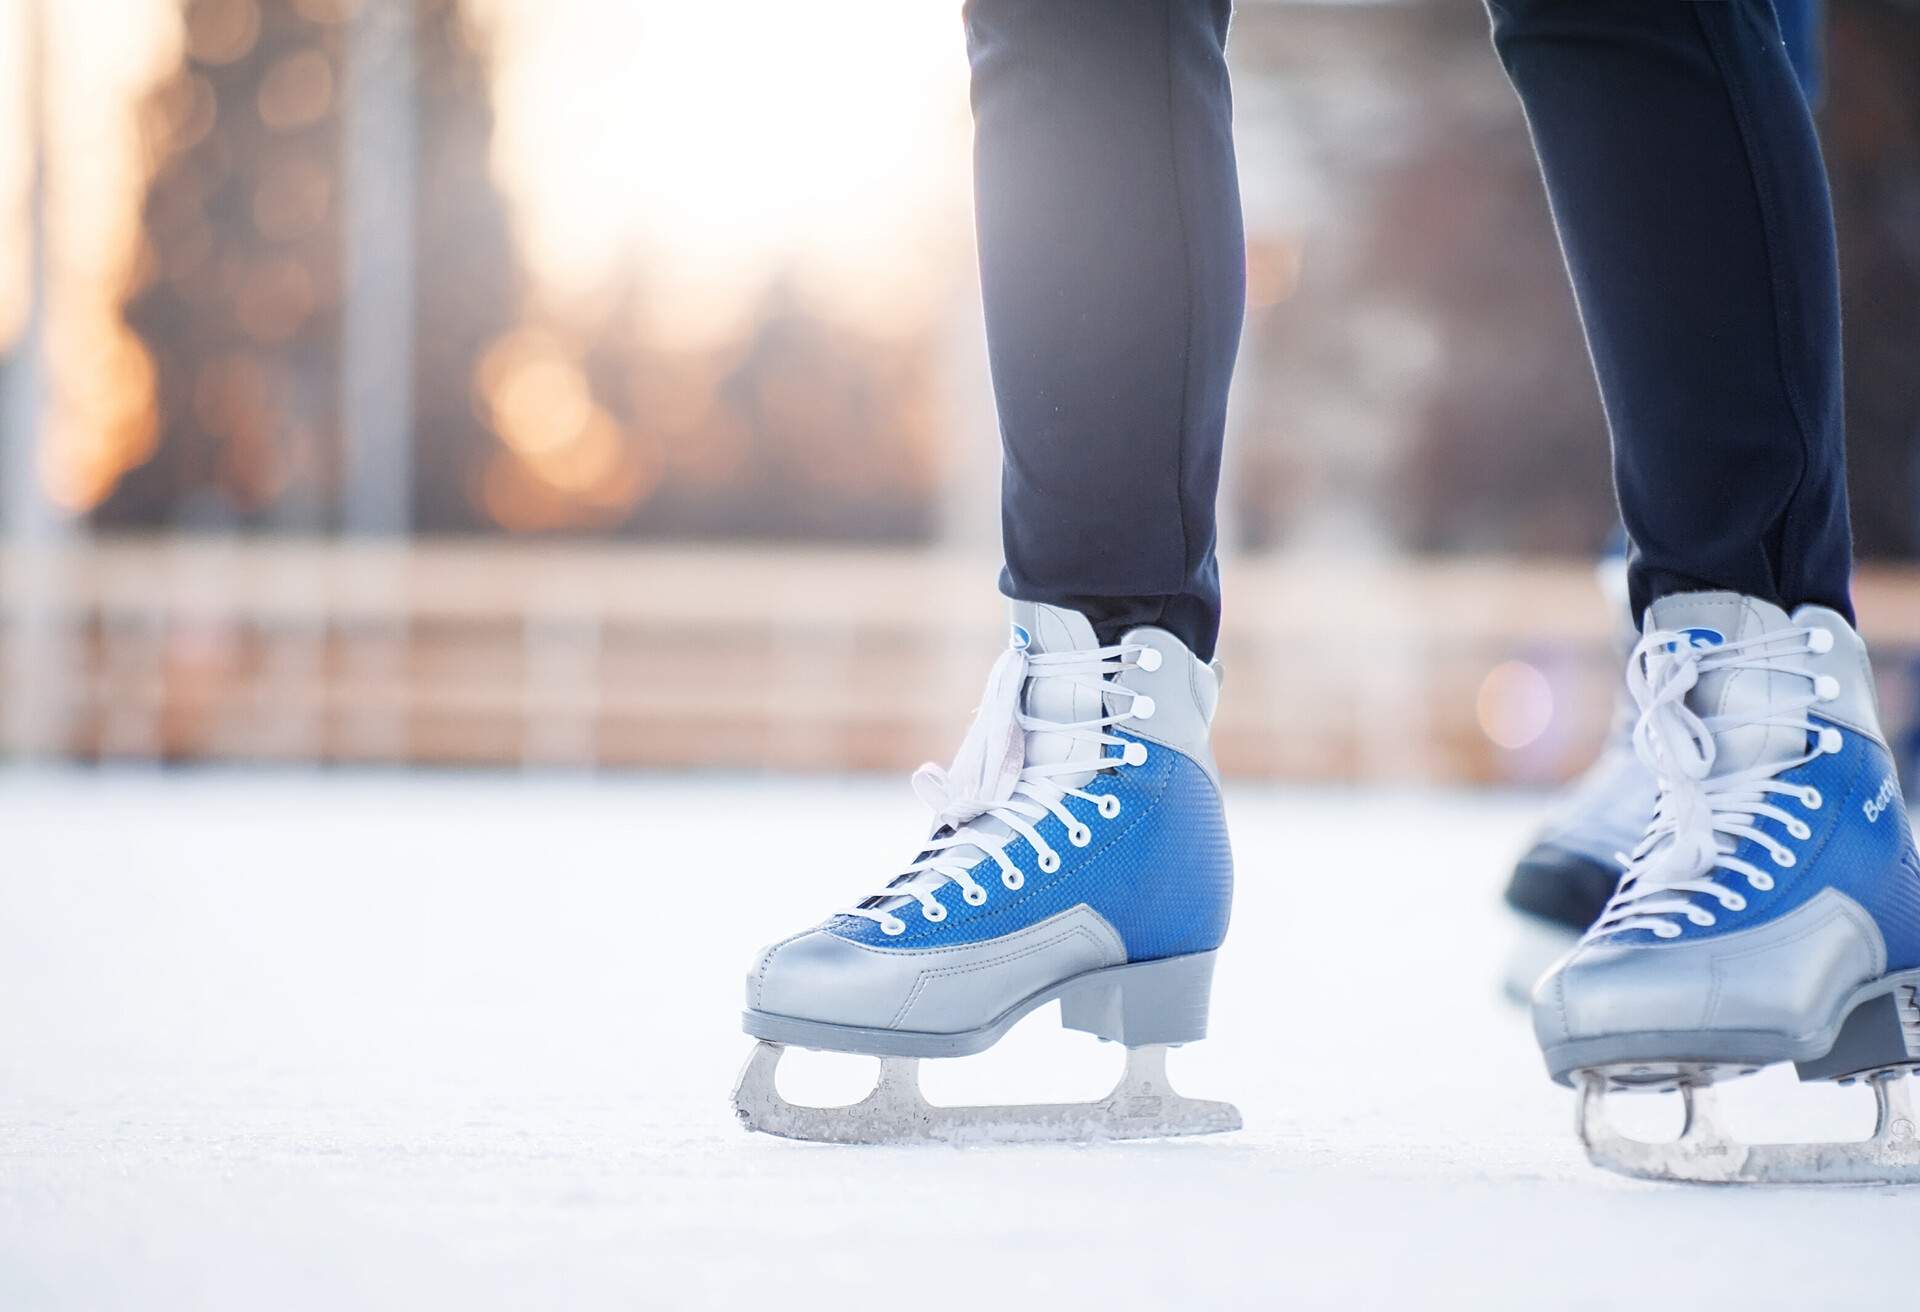 people skating on the ice city rink ; Shutterstock ID 354278909